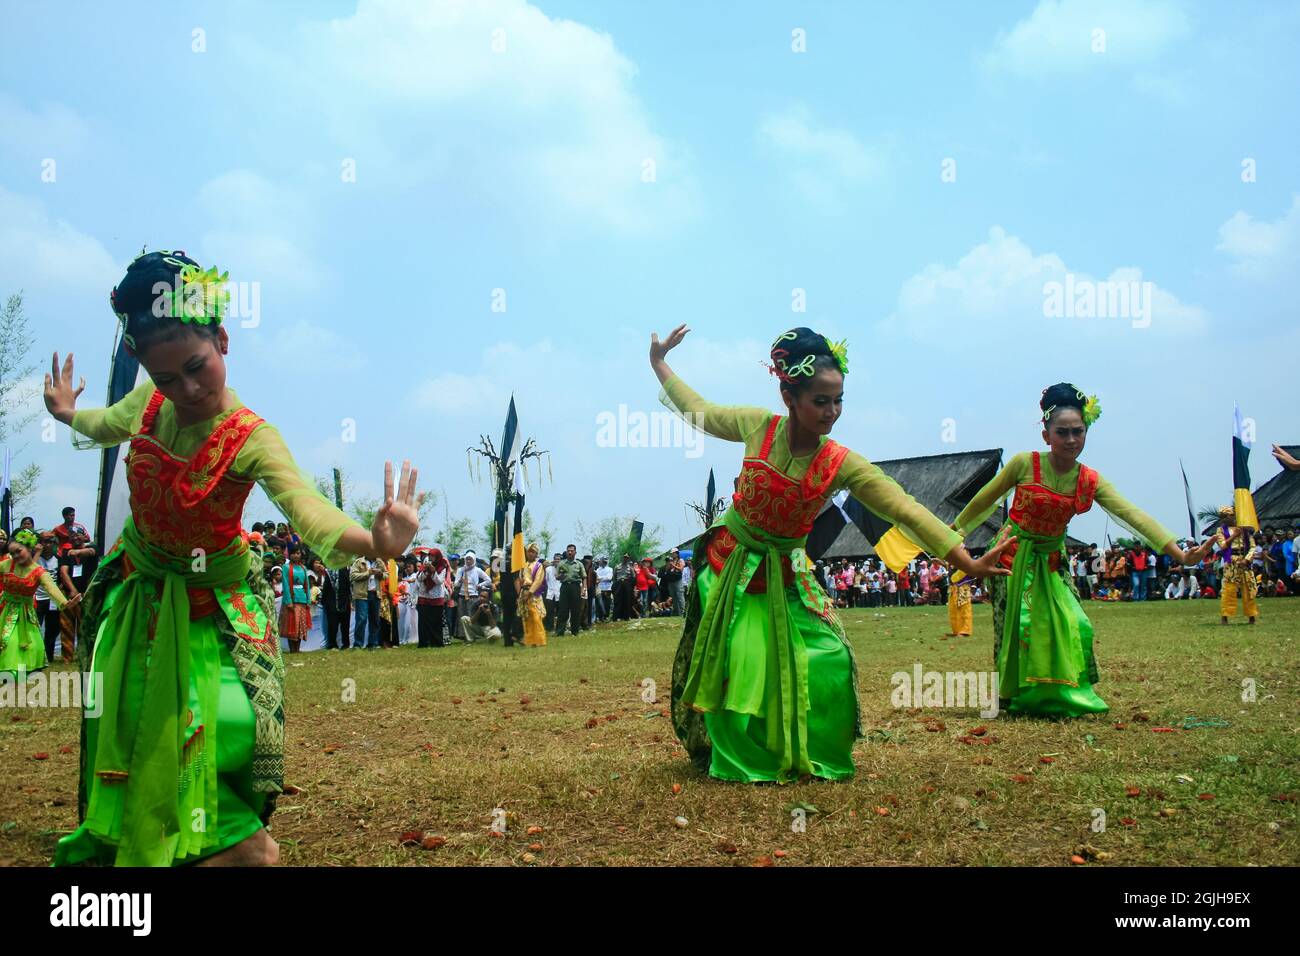 Girls in traditional clothes dance during the Seren Taun event, an annual event after the rice harvest season in Sindang Barang, Bogor, West Java. Stock Photo